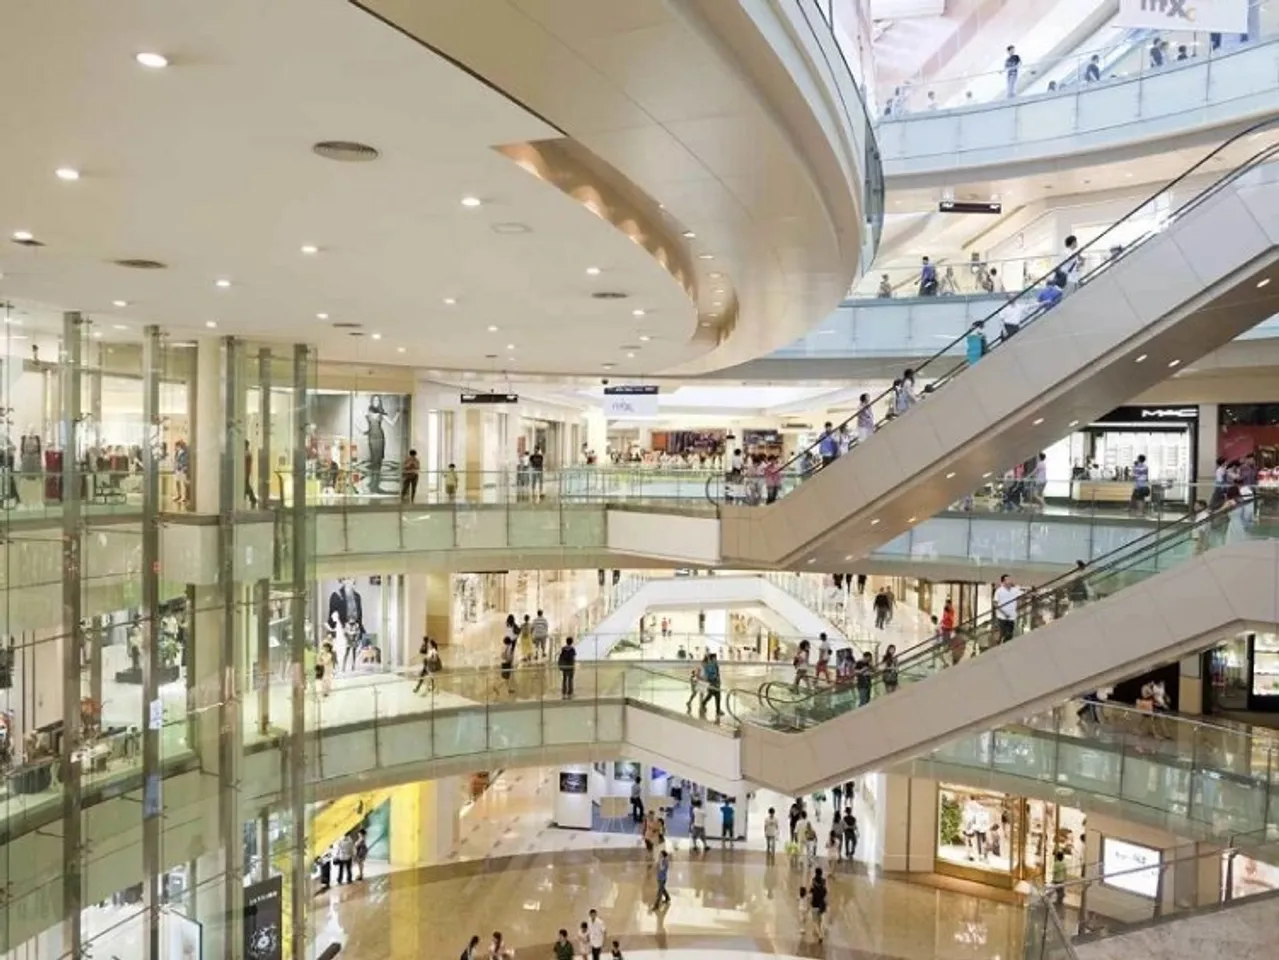 In top 8 cities 16 new shopping malls start operations since 2020: Report